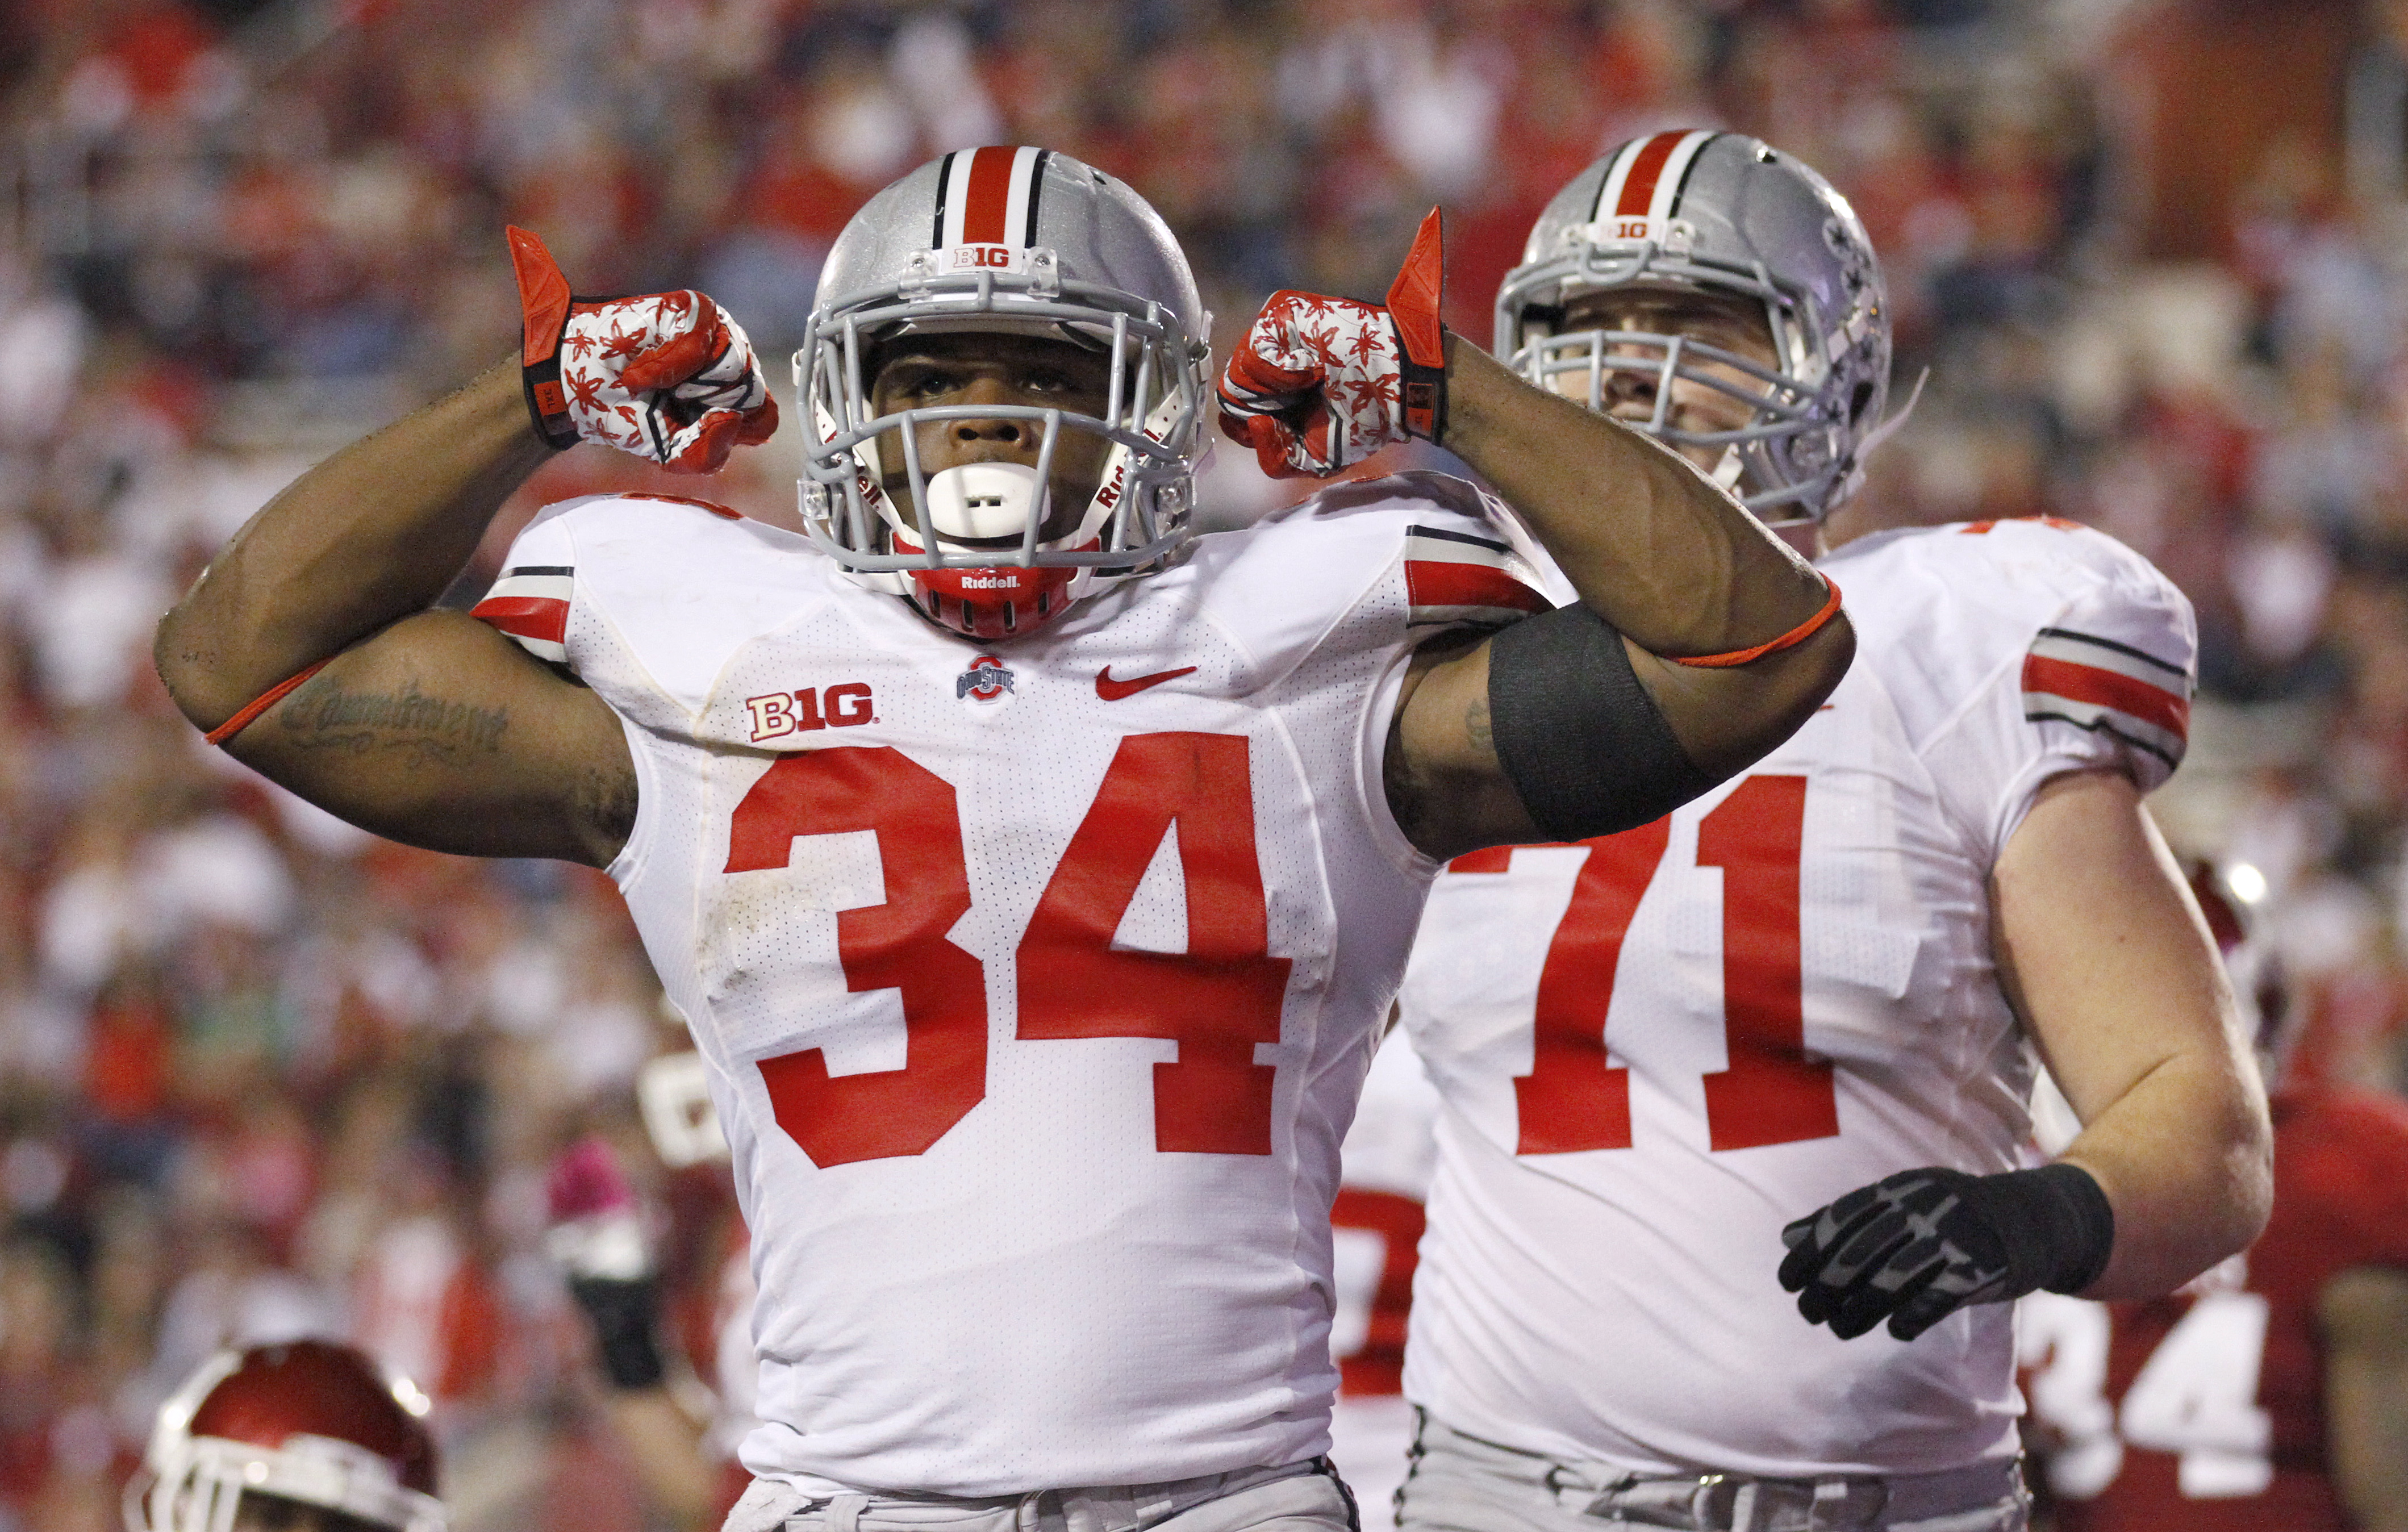 Ohio State football star, Carlos Hyde, reportedly kicked